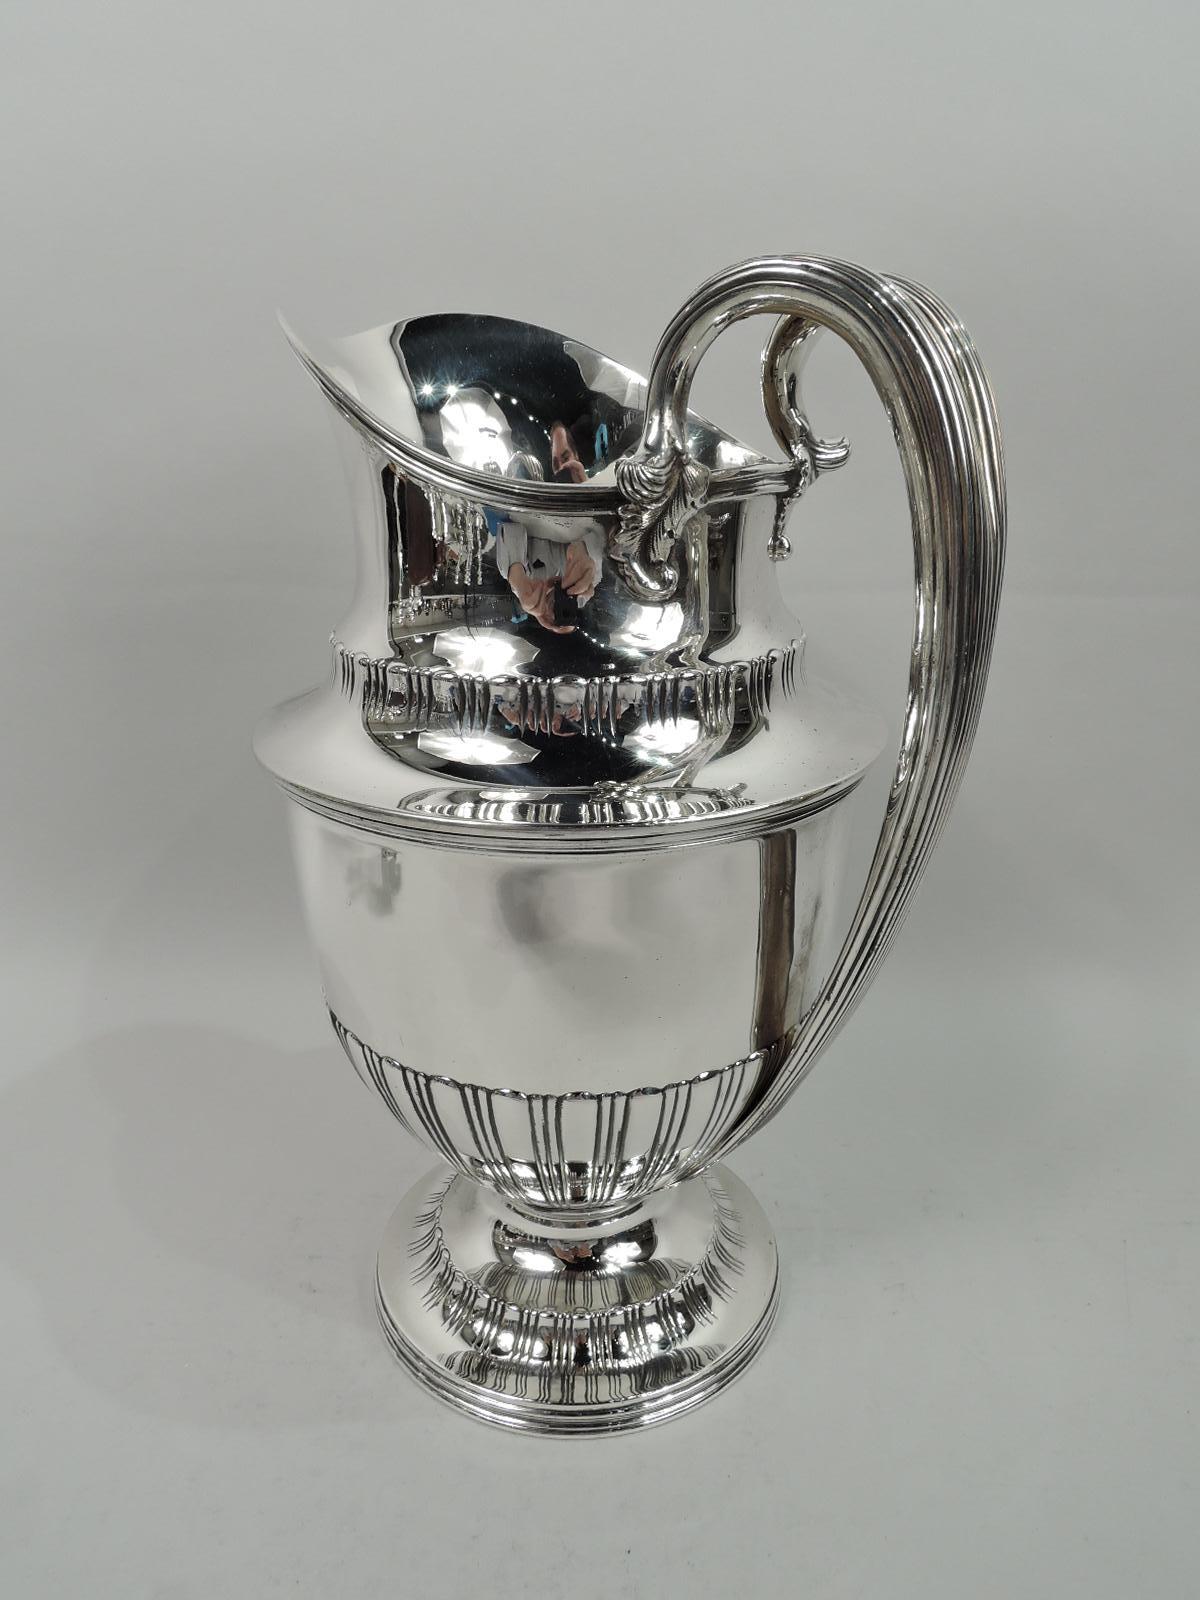 Edwardian classical sterling silver water pitcher. Made by Tiffany & Co. in New York. Helmet mouth and ovoid body on raised and round foot. Chased and incised stylized lobed borders. High-looping reeded handle with split and leaf-mounted top. Fully